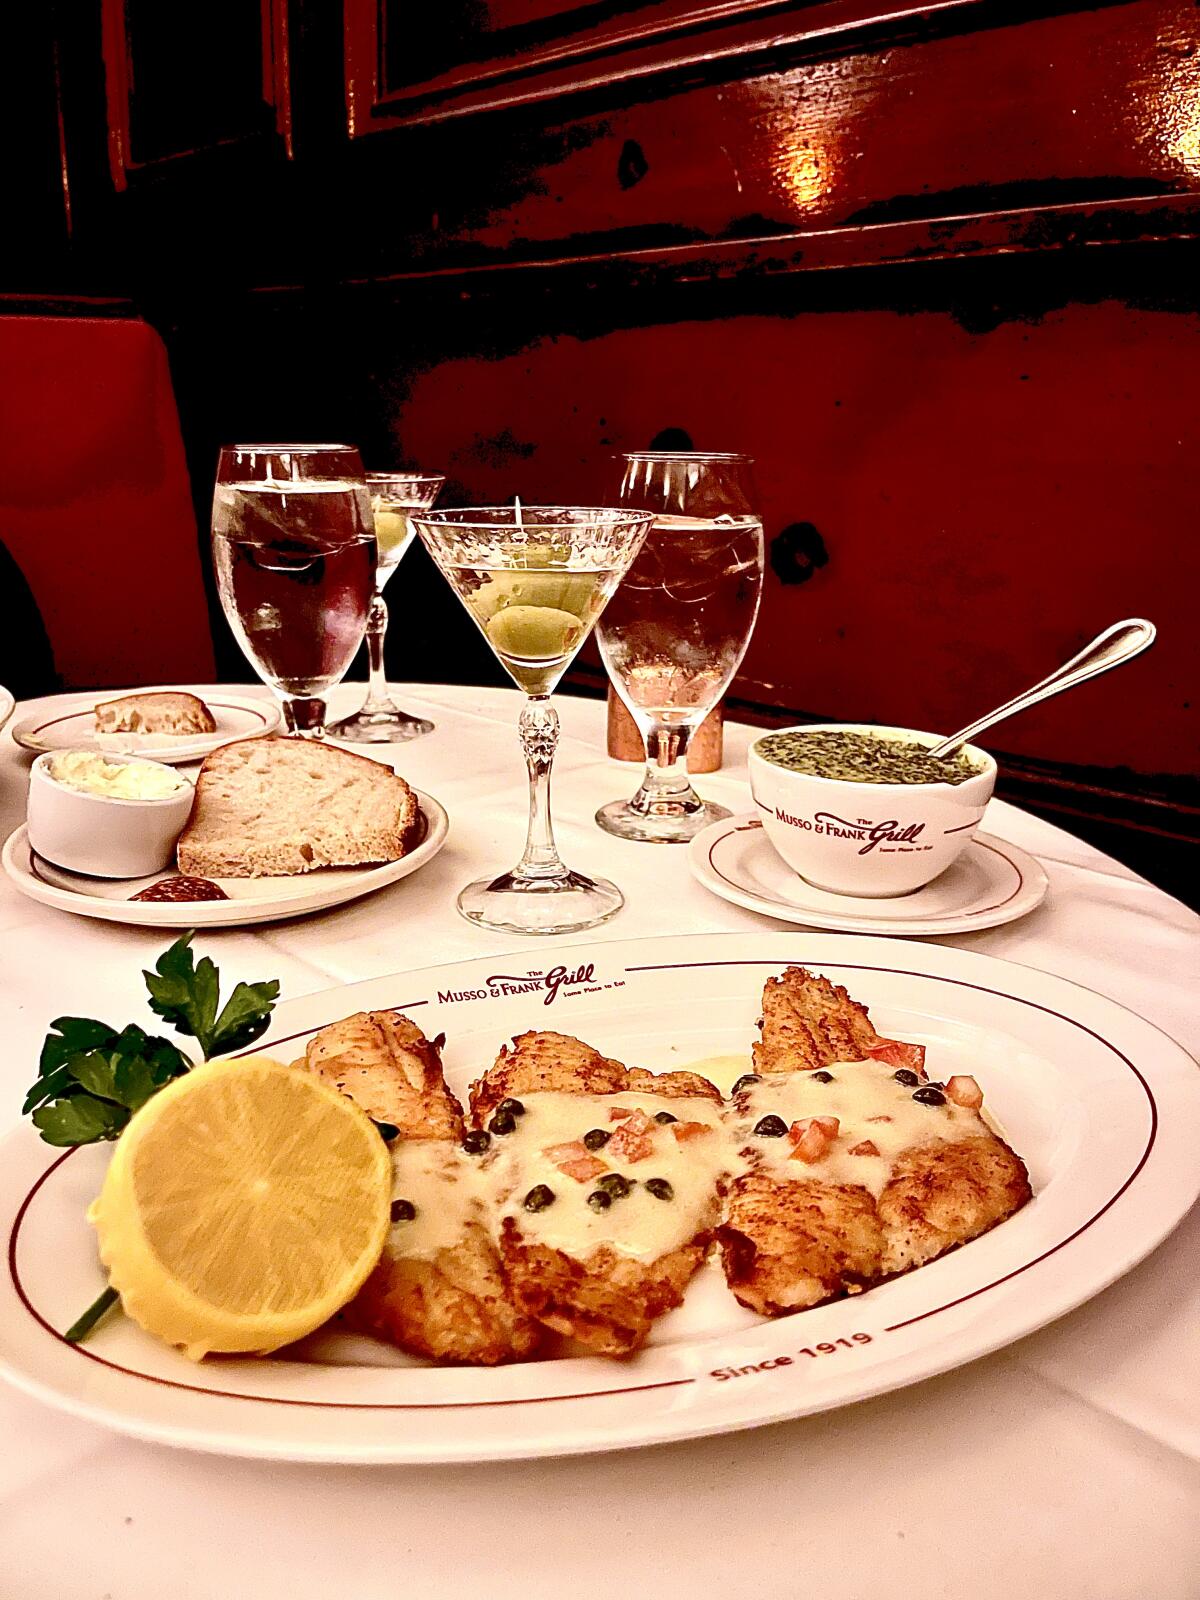 Sand dabs, creamed spinach and a martini at Musso & Frank Grill in Hollywood.